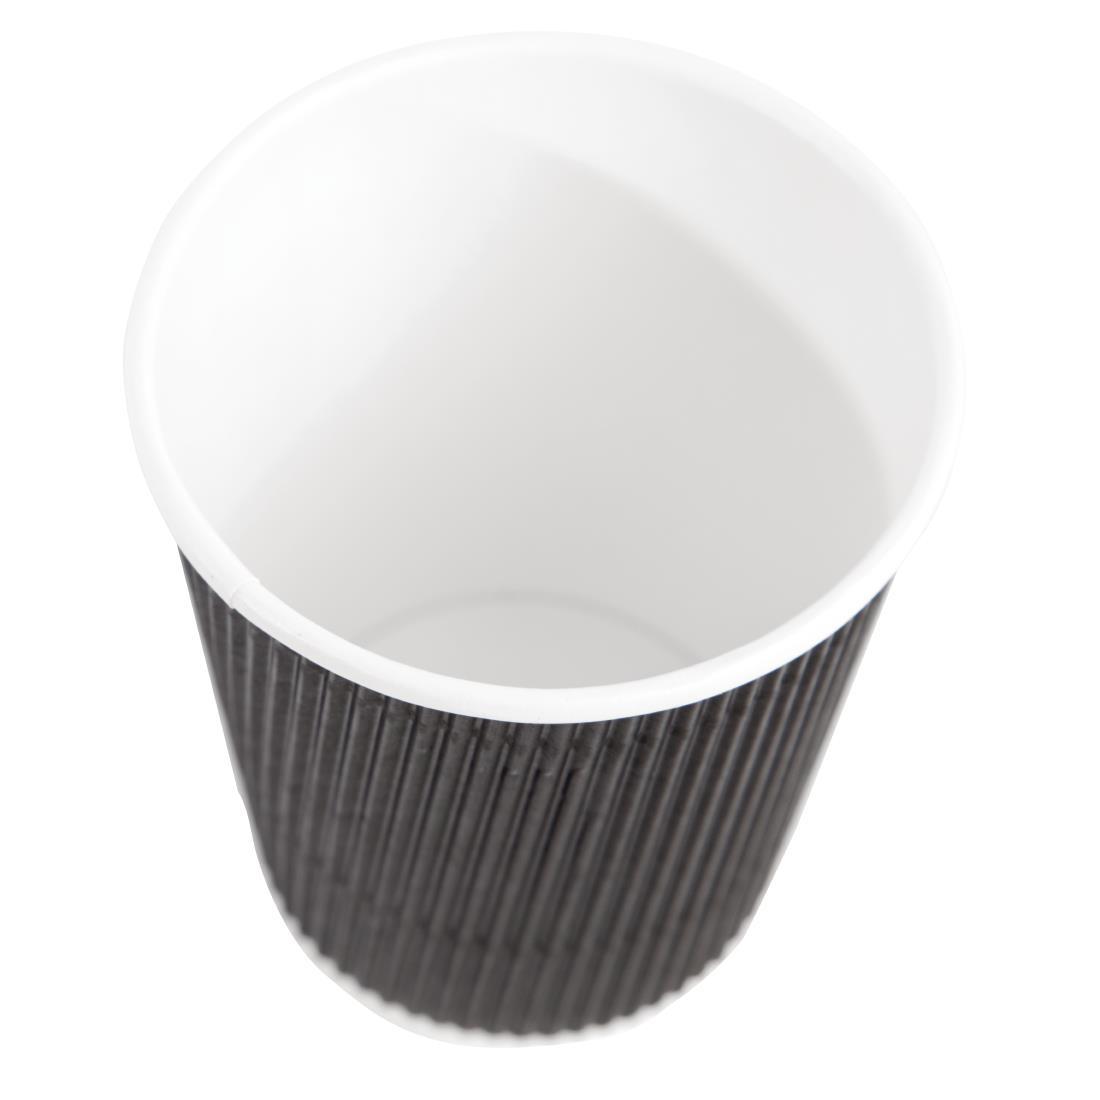 Fiesta Recyclable Coffee Cups Ripple Wall Black 225ml / 8oz (Pack of 25) - CM540  - 3